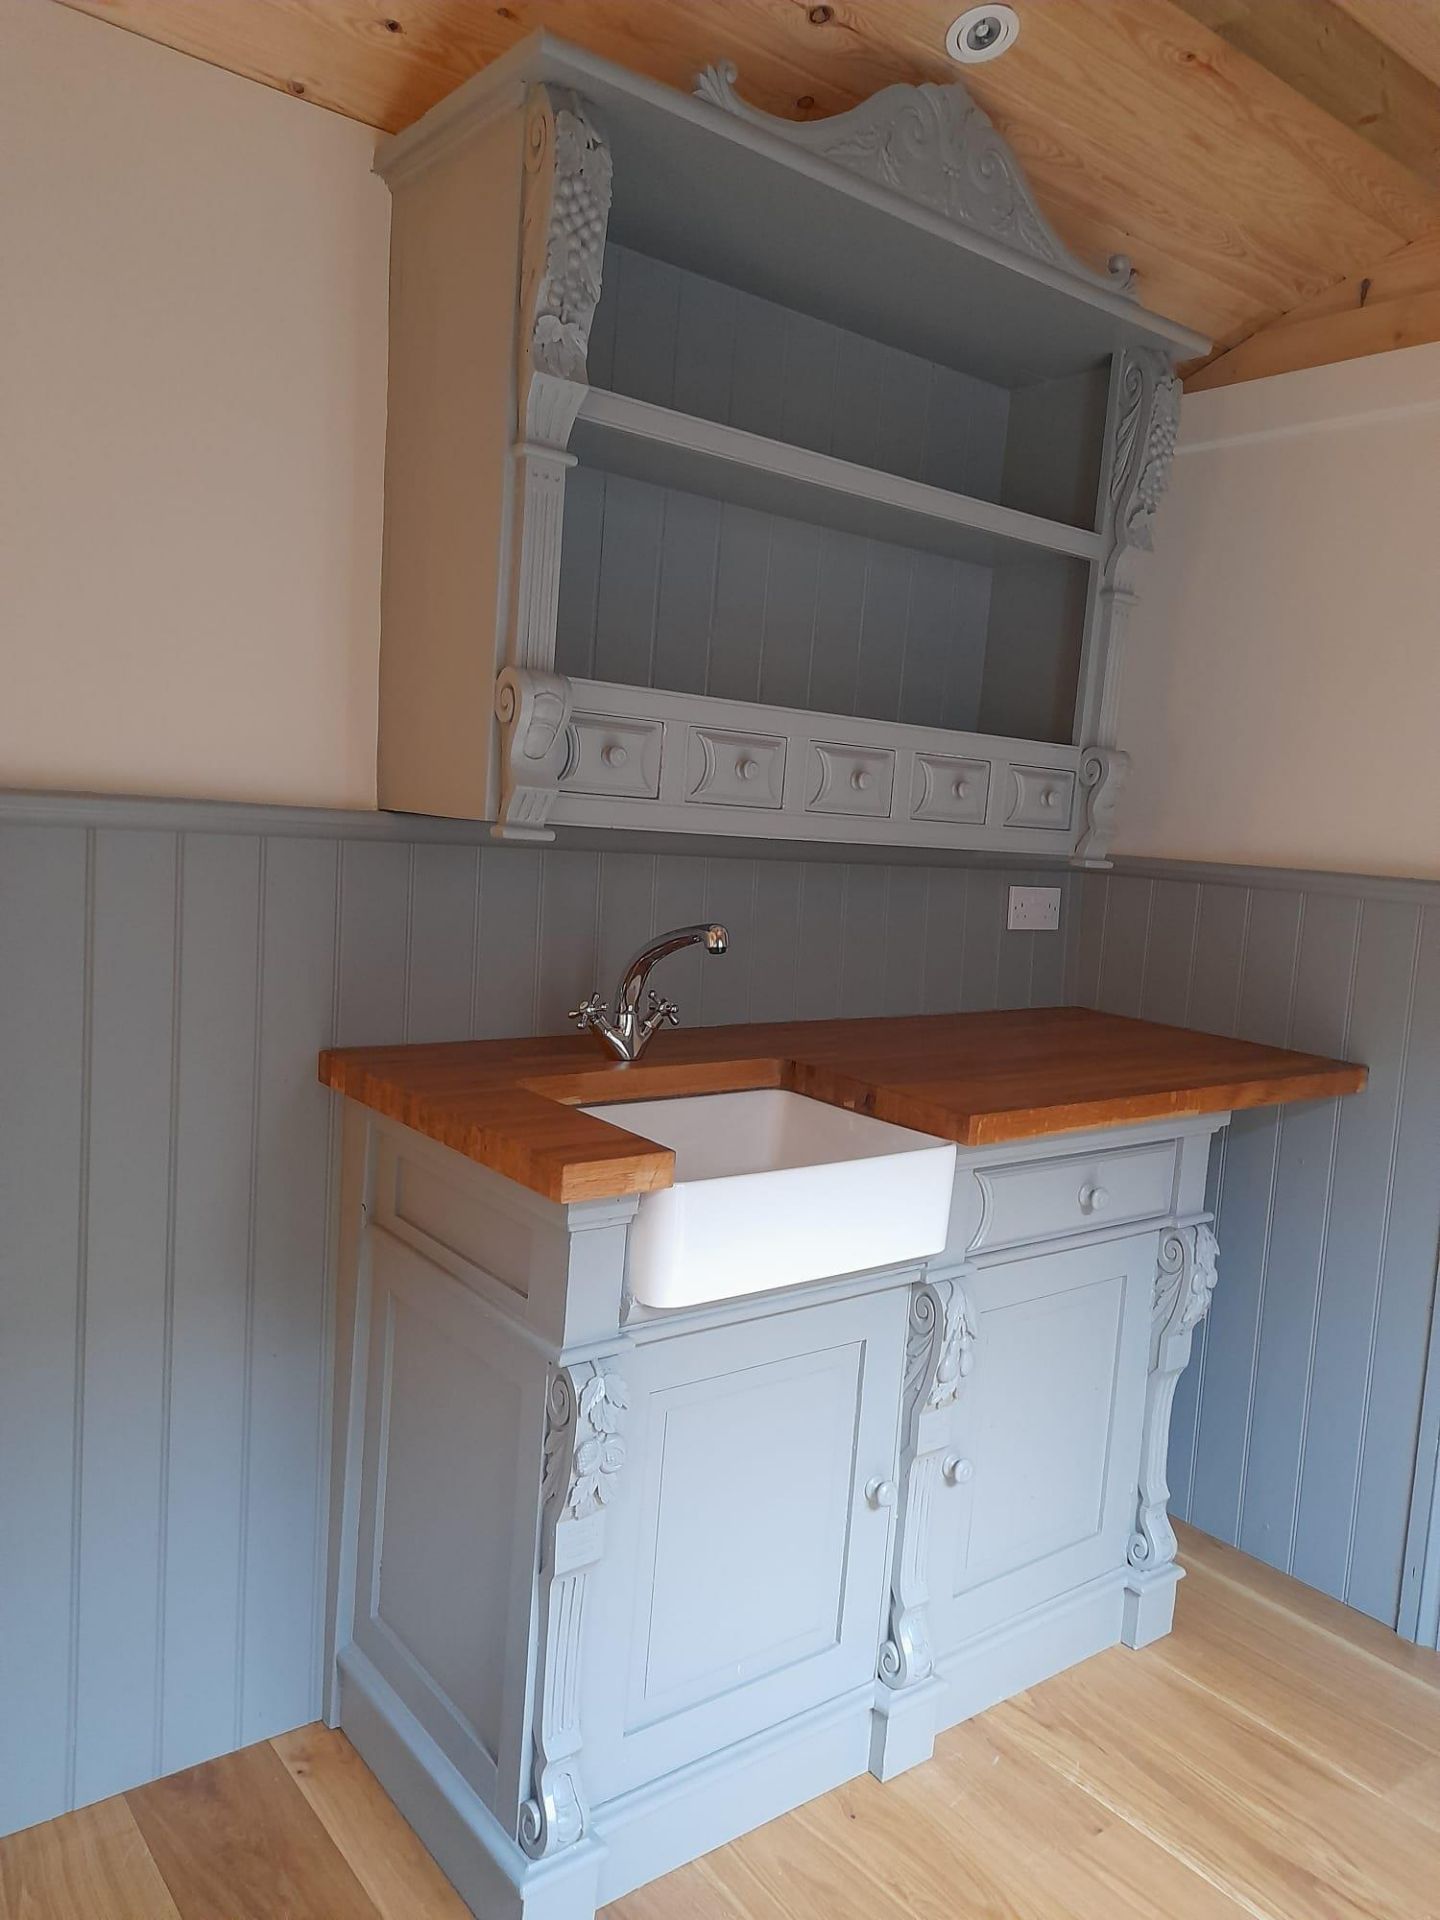 A SHEPHERDS HUT - LUXURIOUS NEW HAND CRAFTED, FULLY FINISHED BUILT FOR ALL YEAR ROUND USE HEAVILY - Image 7 of 13